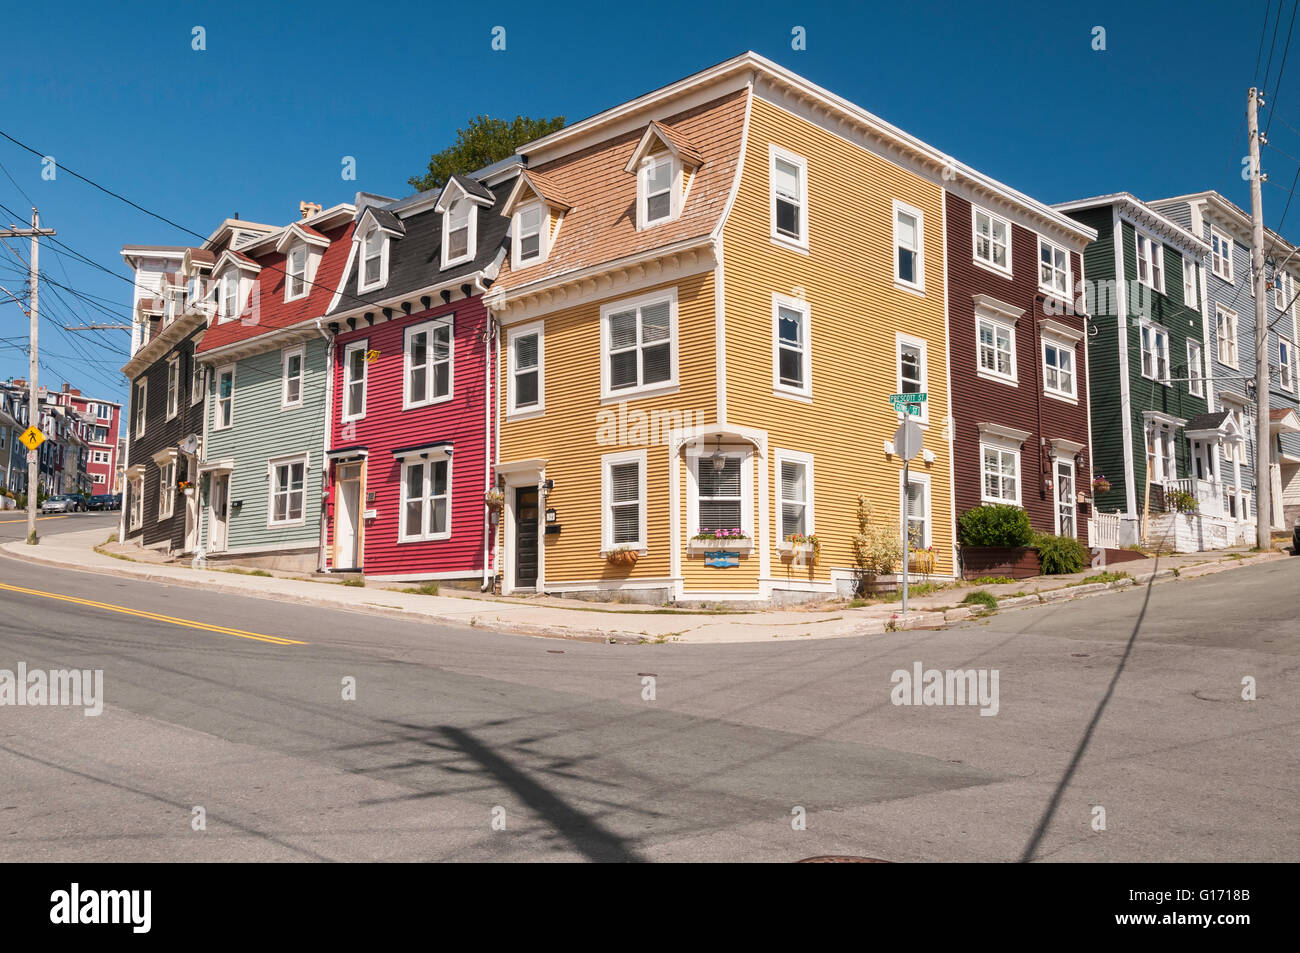 Colorful jelly bean houses, the corner of Prescott and Gower streets, St. John's, Newfoundland, Canada Stock Photo